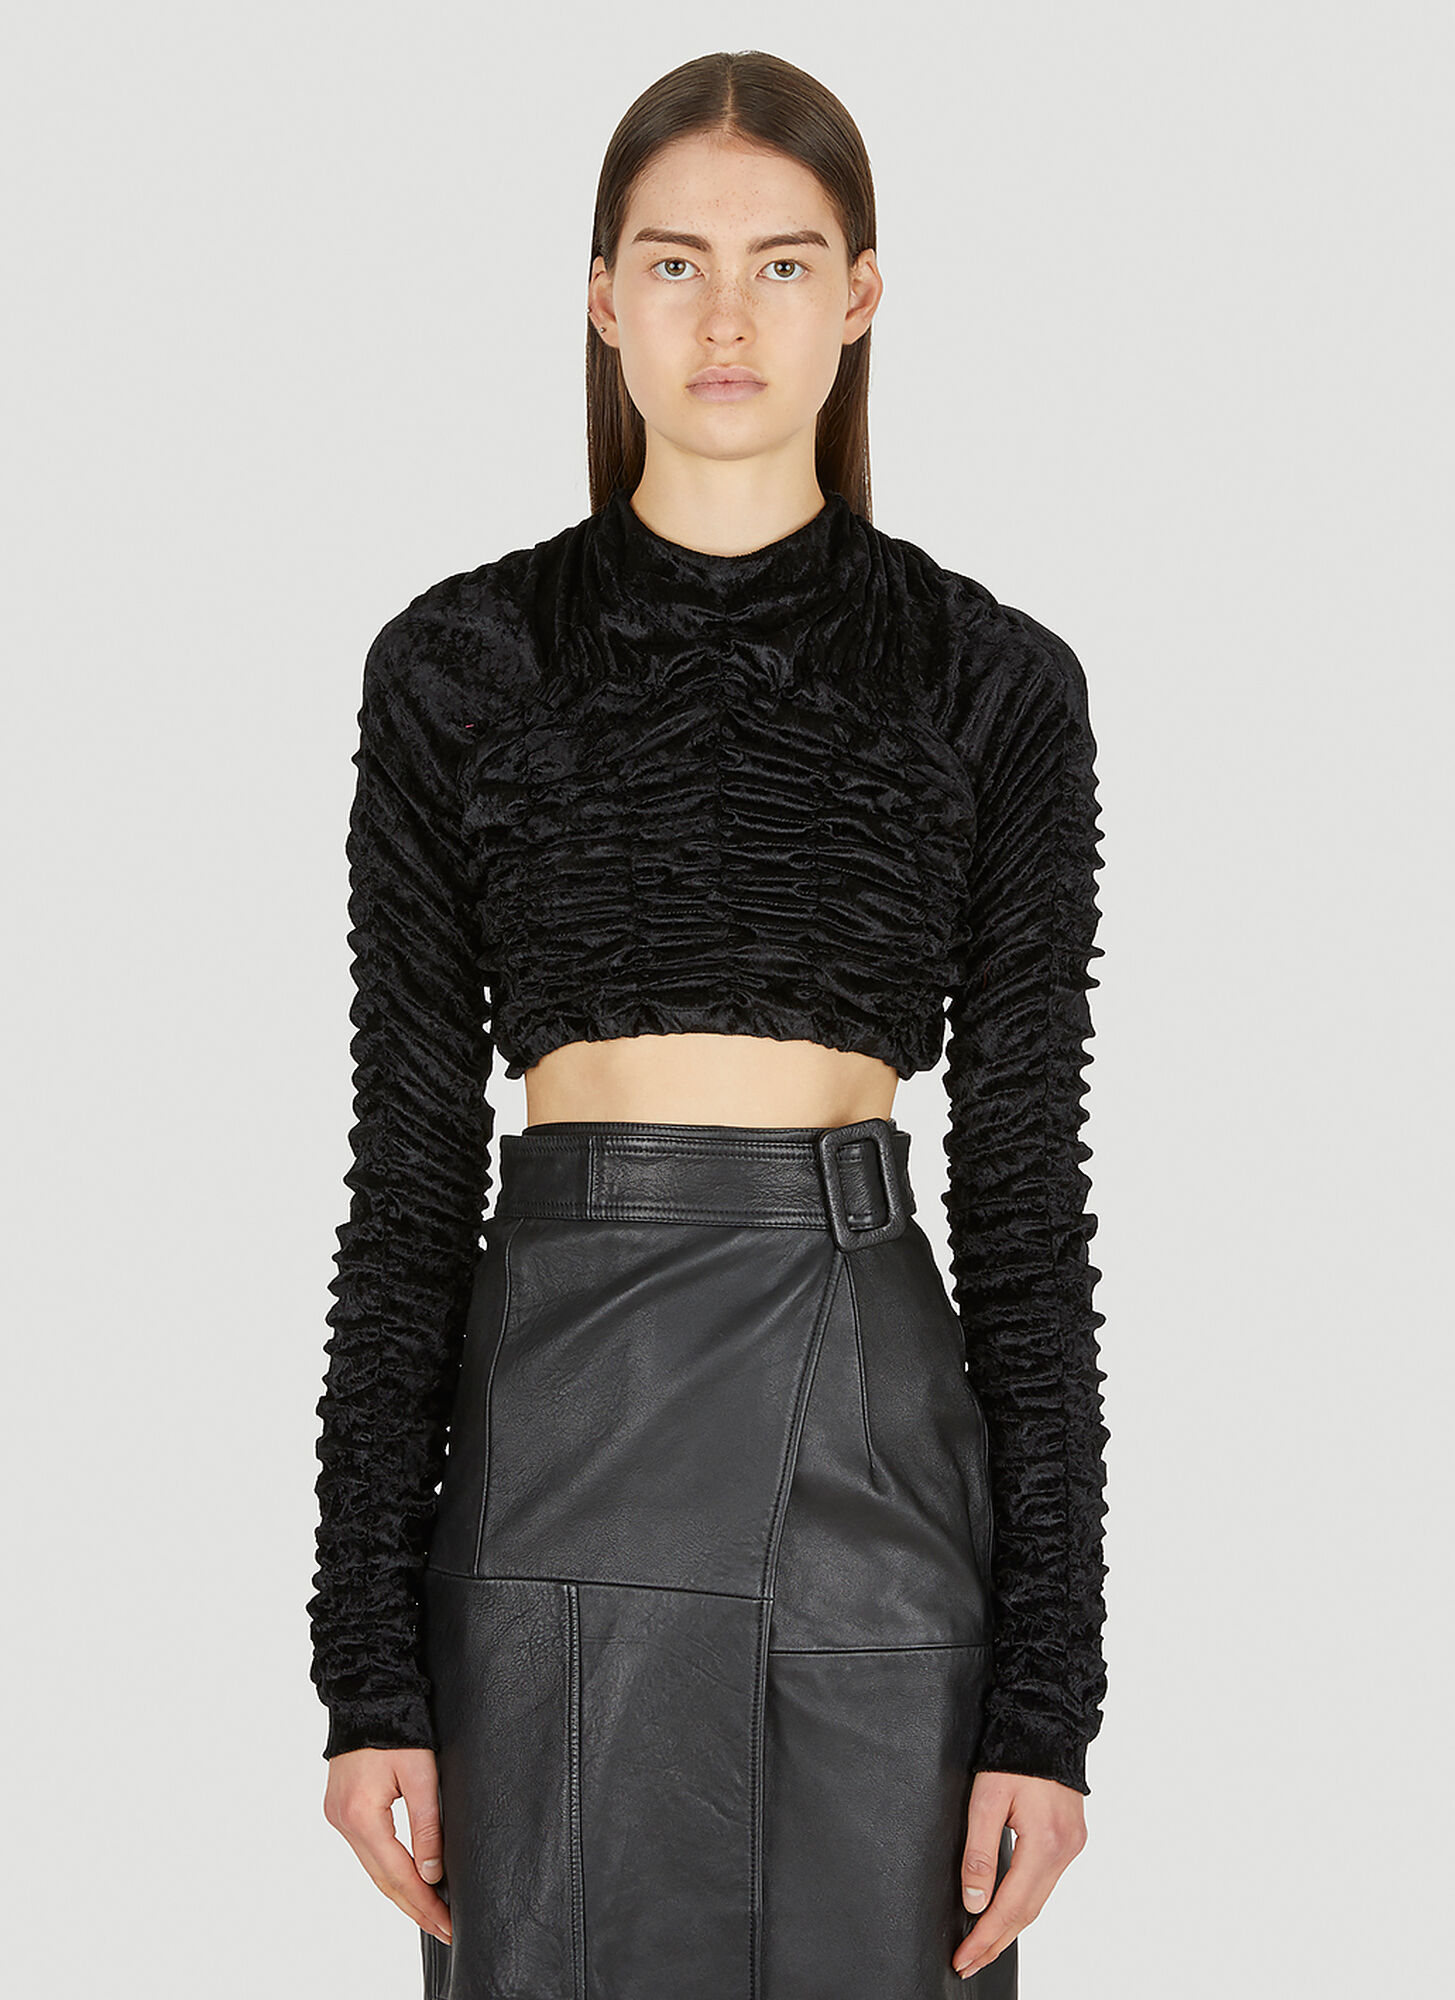 Ester Manas Ruched Top In Black